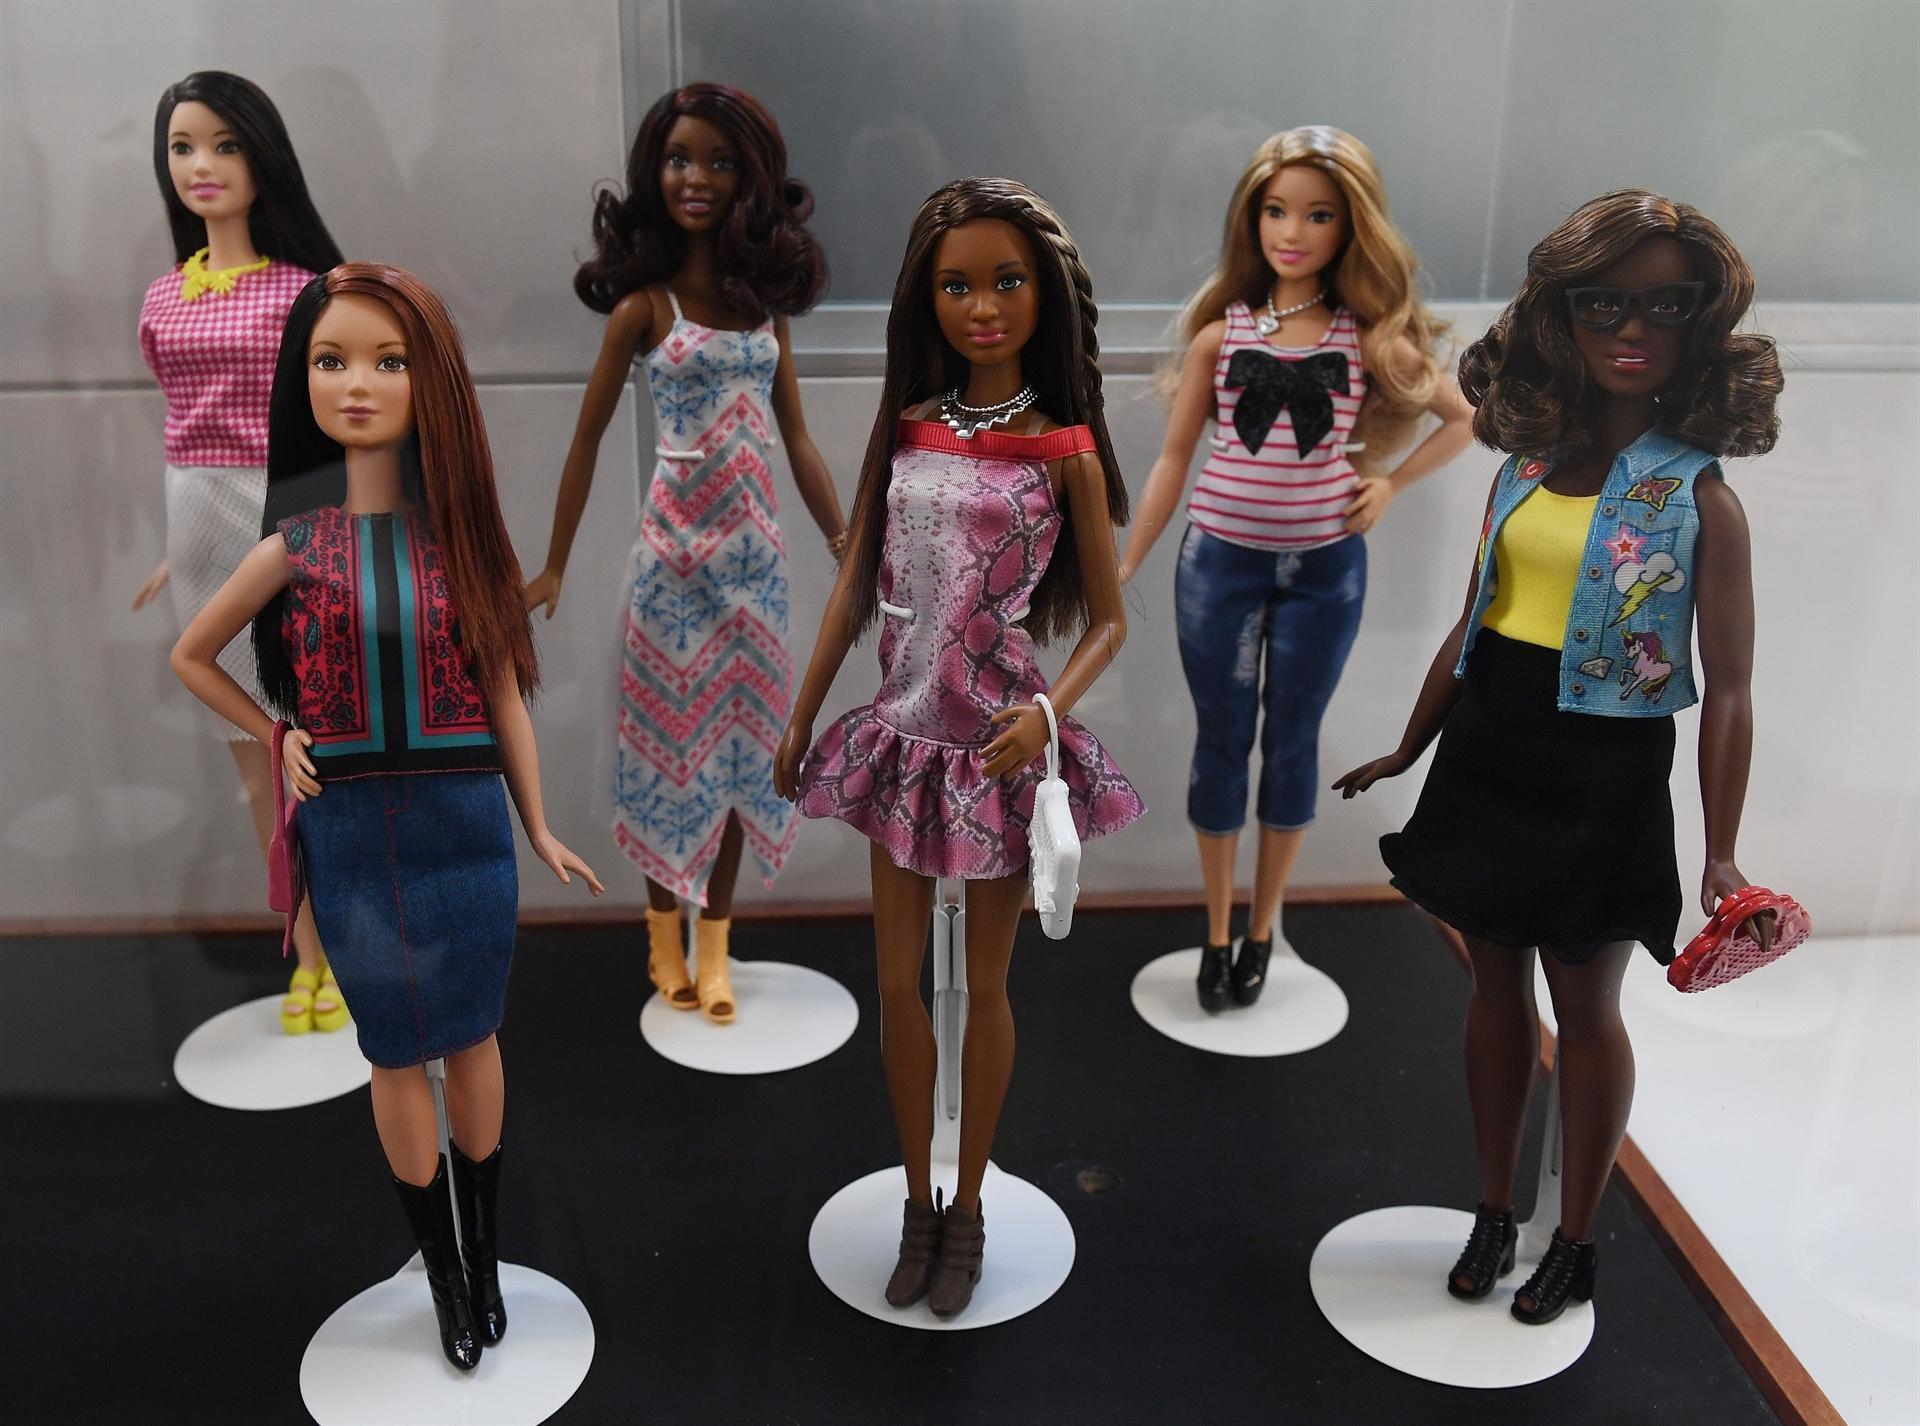 Year 2018 Barbie Made To Move You Can Be Anything Series 12 Inch